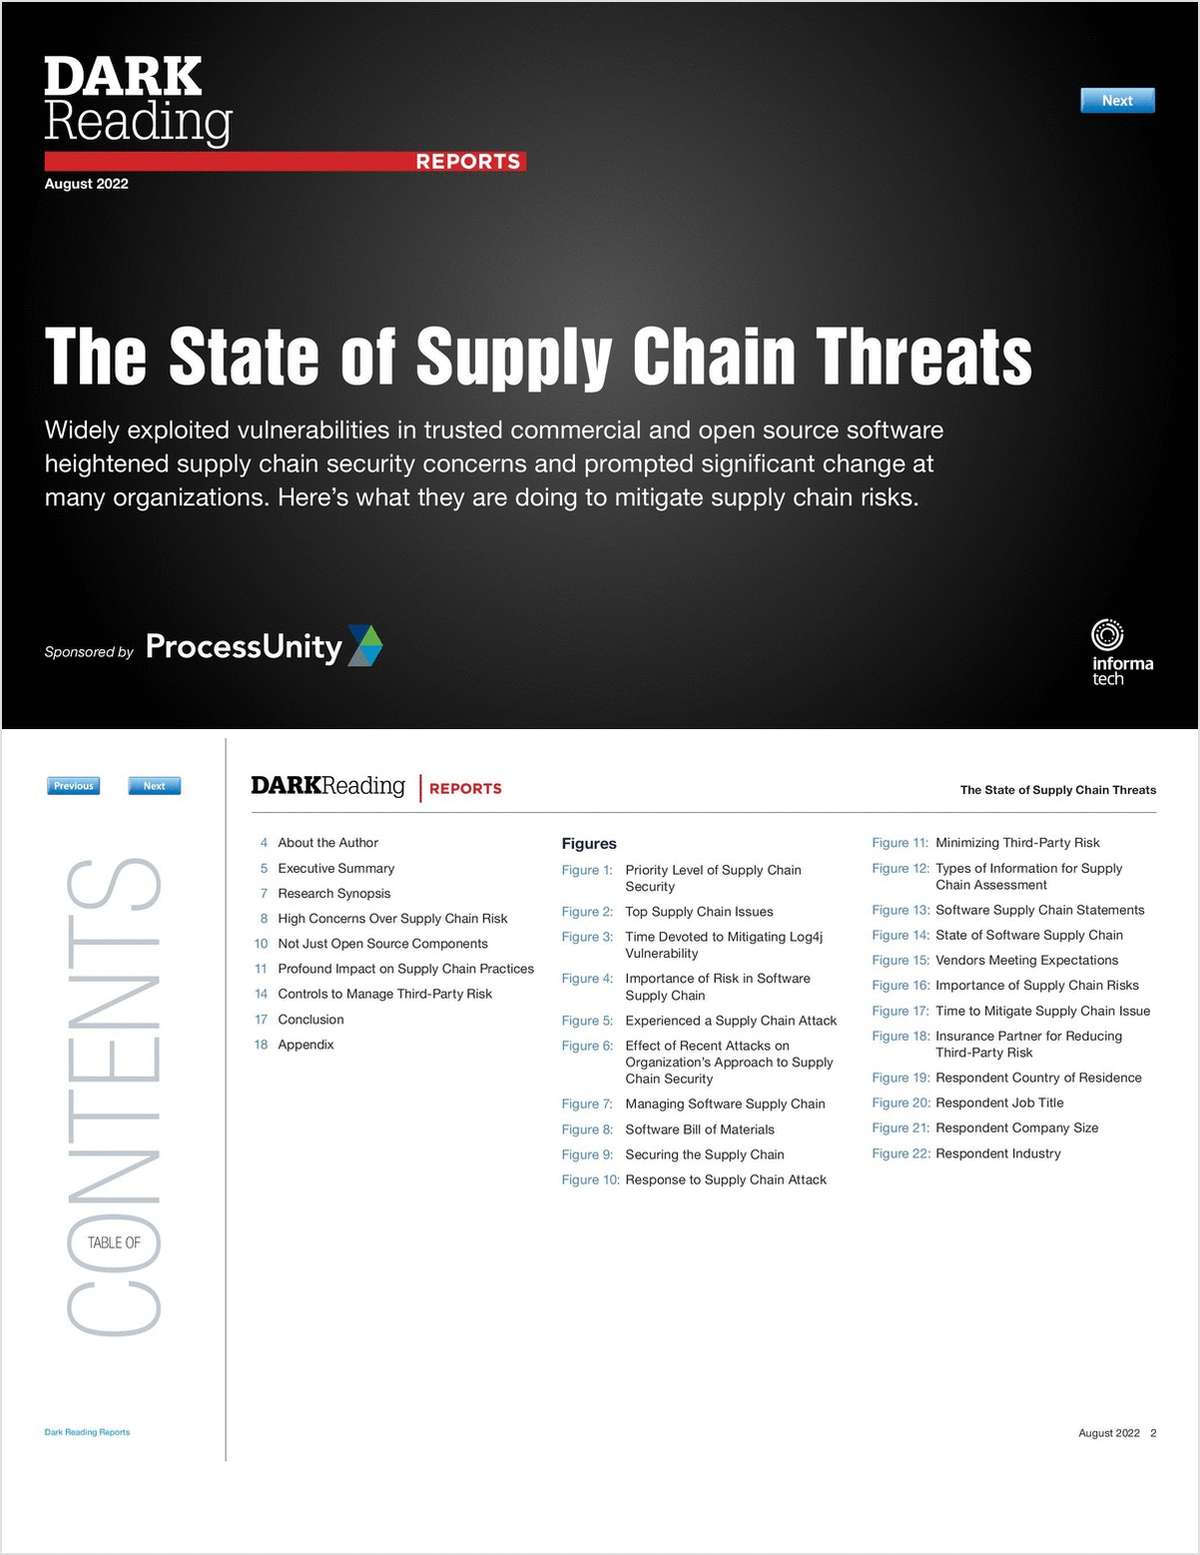 The State of Supply Chain Threats